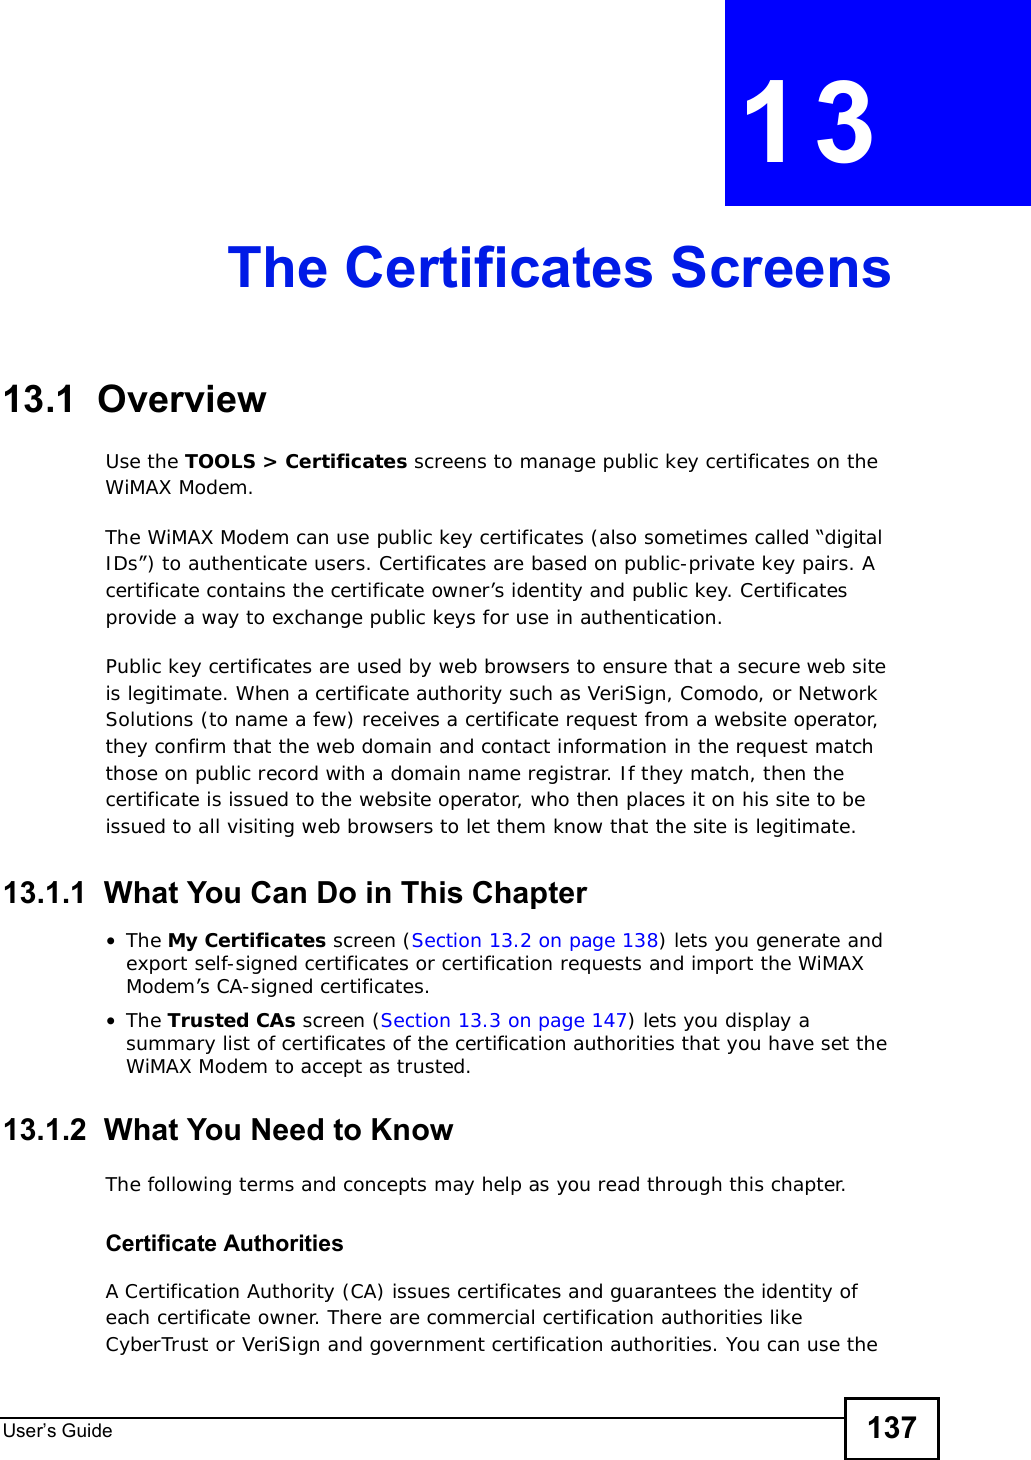 User s Guide 137CHAPTER 13The Certificates Screens13.1  OverviewUse the TOOLS &gt; Certificates screens to manage public key certificates on the WiMAX Modem.The WiMAX Modem can use public key certificates (also sometimes called “digital IDs”) to authenticate users. Certificates are based on public-private key pairs. A certificate contains the certificate owner’s identity and public key. Certificates provide a way to exchange public keys for use in authentication.Public key certificates are used by web browsers to ensure that a secure web site is legitimate. When a certificate authority such as VeriSign, Comodo, or Network Solutions (to name a few) receives a certificate request from a website operator, they confirm that the web domain and contact information in the request match those on public record with a domain name registrar. If they match, then the certificate is issued to the website operator, who then places it on his site to be issued to all visiting web browsers to let them know that the site is legitimate.13.1.1  What You Can Do in This Chapter•The My Certificates screen (Section 13.2 on page 138) lets you generate and export self-signed certificates or certification requests and import the WiMAX Modem’s CA-signed certificates.•The Trusted CAs screen (Section 13.3 on page 147) lets you display a summary list of certificates of the certification authorities that you have set the WiMAX Modem to accept as trusted.13.1.2  What You Need to KnowThe following terms and concepts may help as you read through this chapter.Certificate AuthoritiesA Certification Authority (CA) issues certificates and guarantees the identity of each certificate owner. There are commercial certification authorities like CyberTrust or VeriSign and government certification authorities. You can use the 